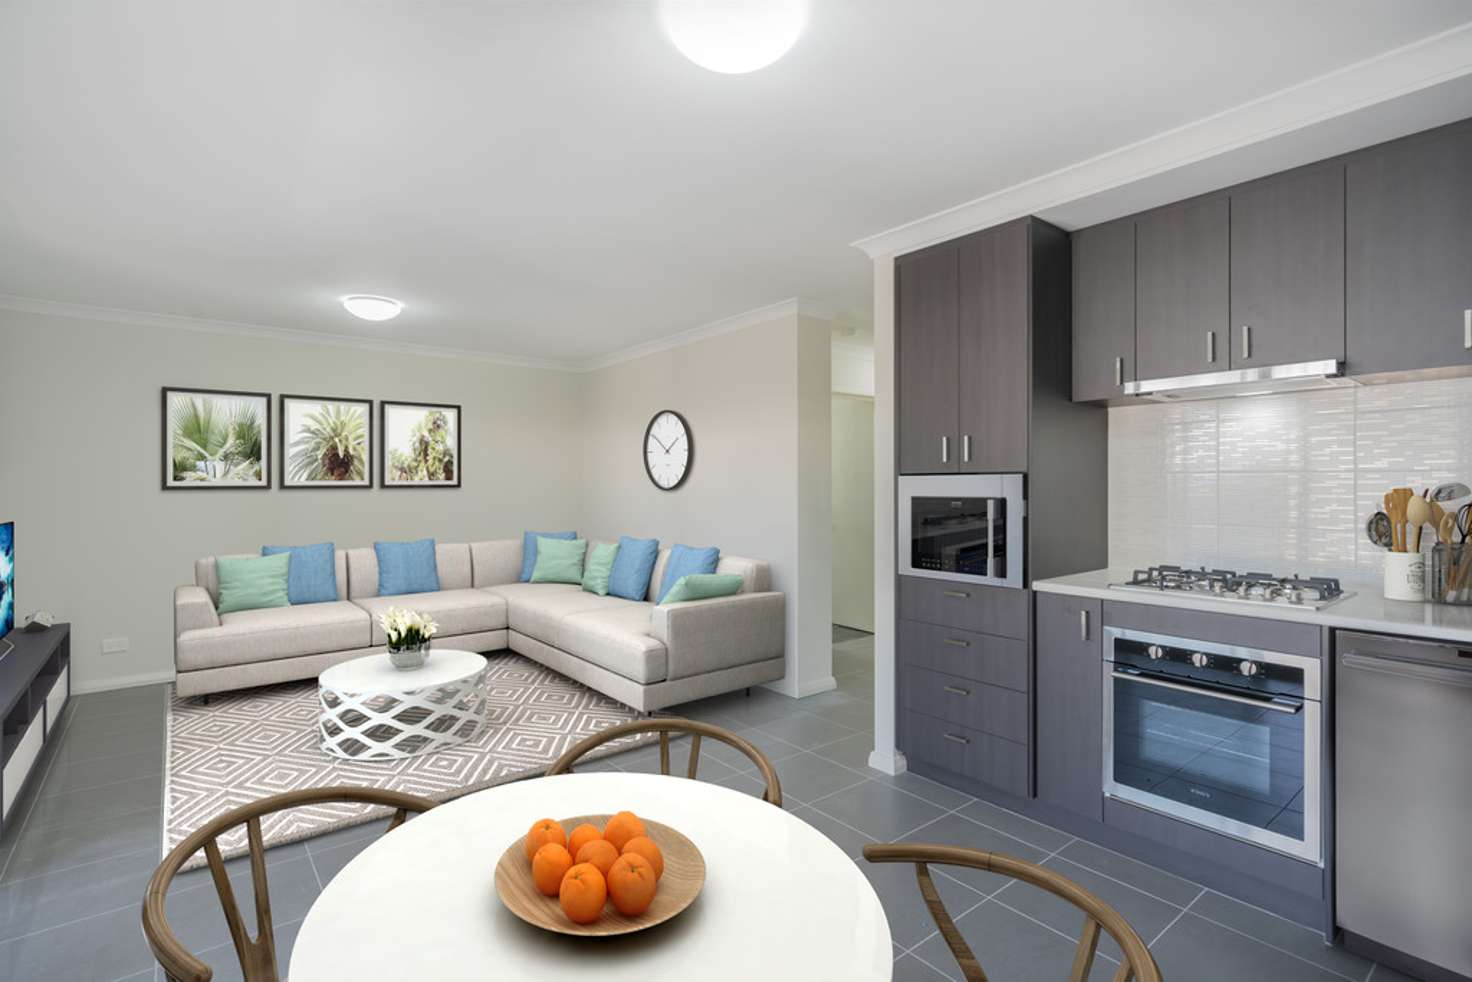 Main view of Homely apartment listing, 11/41 Wheyland Street, Willagee WA 6156